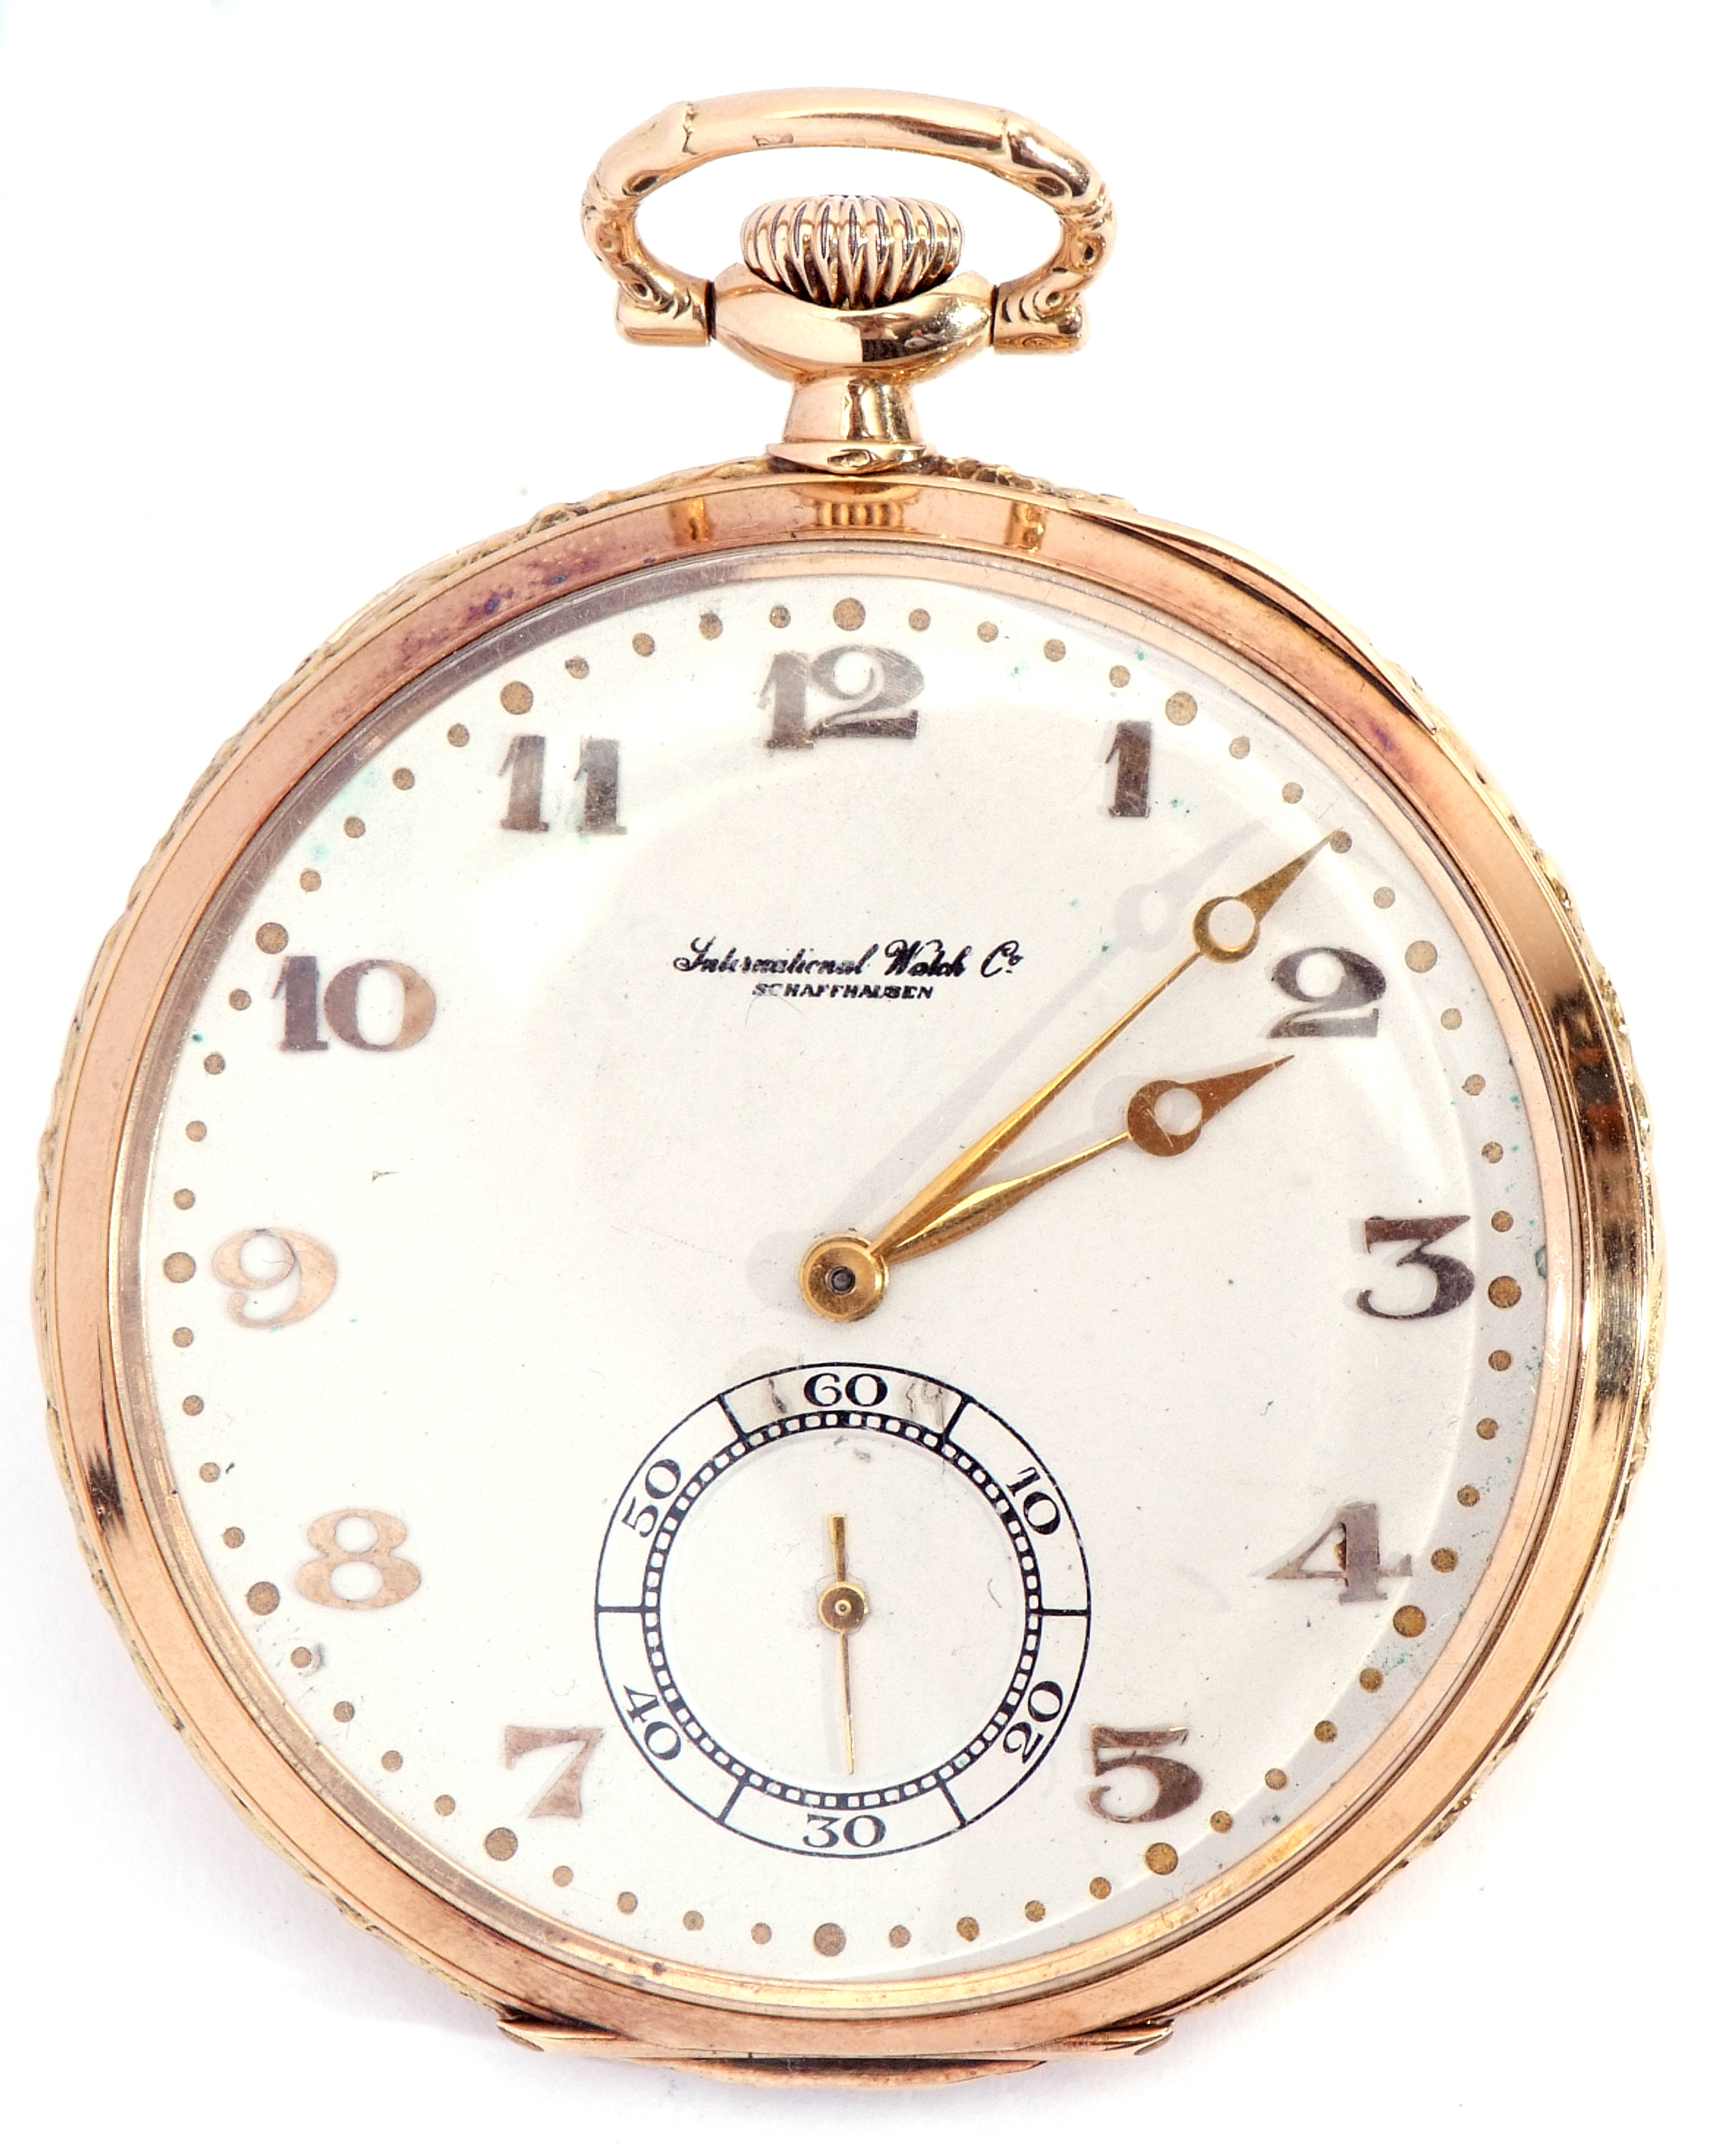 Gent's second/third quarter of the 20th century slimline 14K gold pocket watch by The - Image 3 of 5